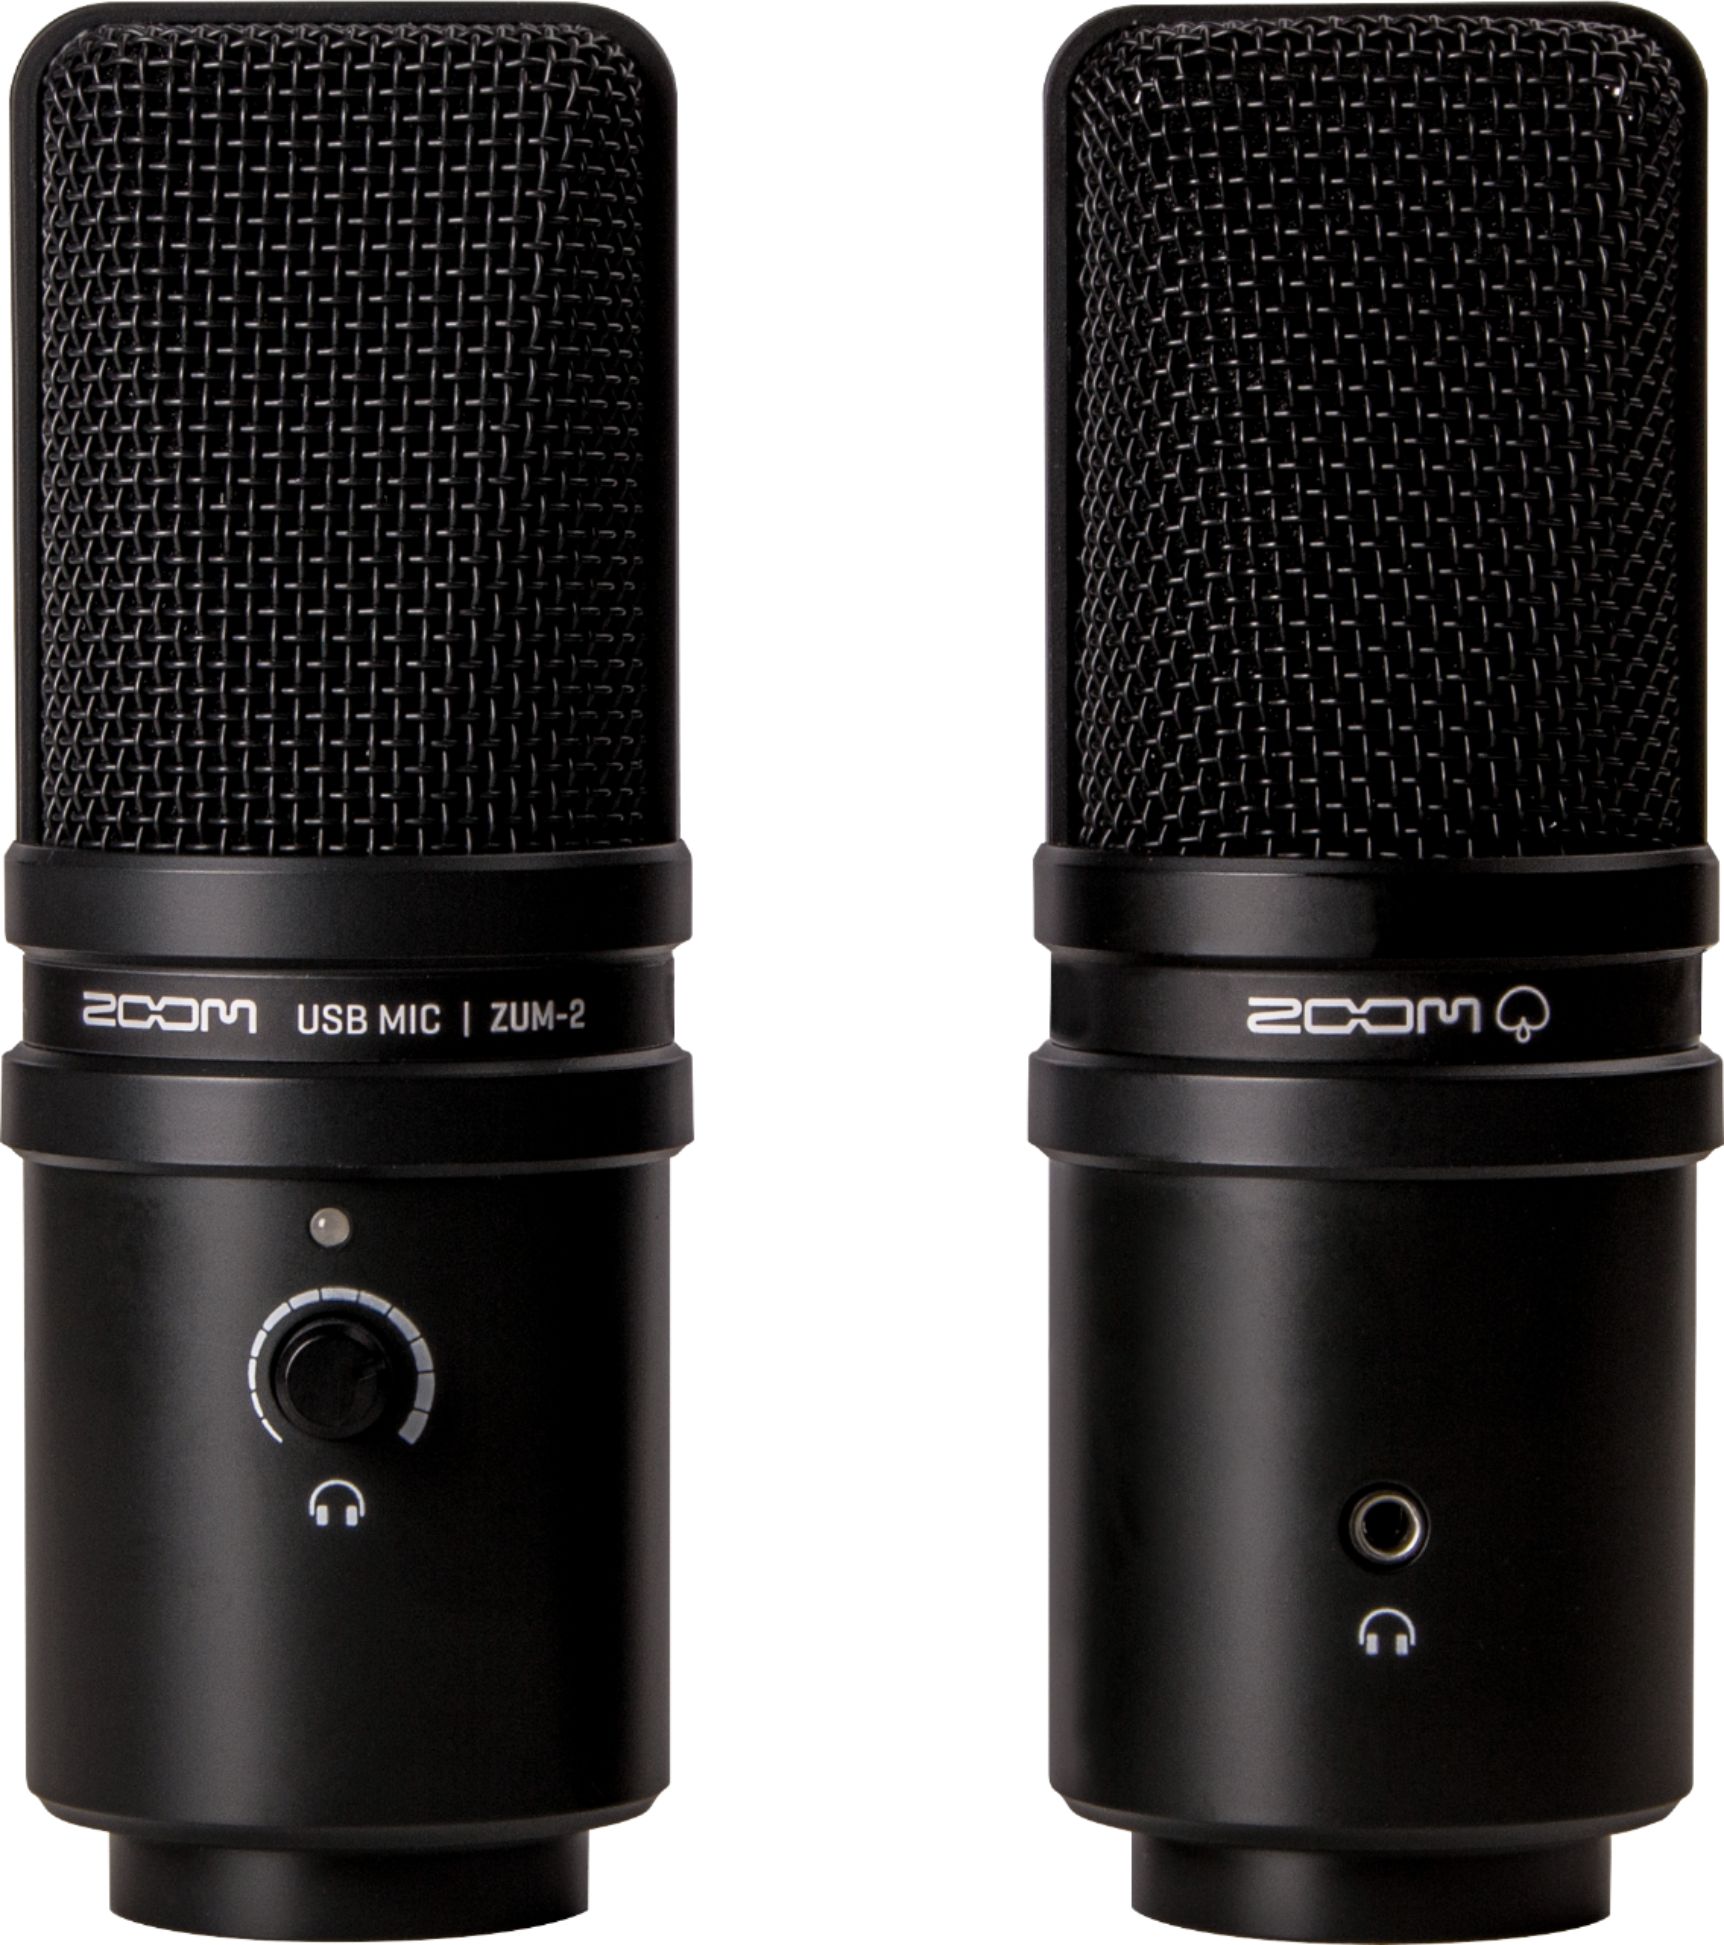 Best Microphones for Zoom, According to the CNET Staff Who Use